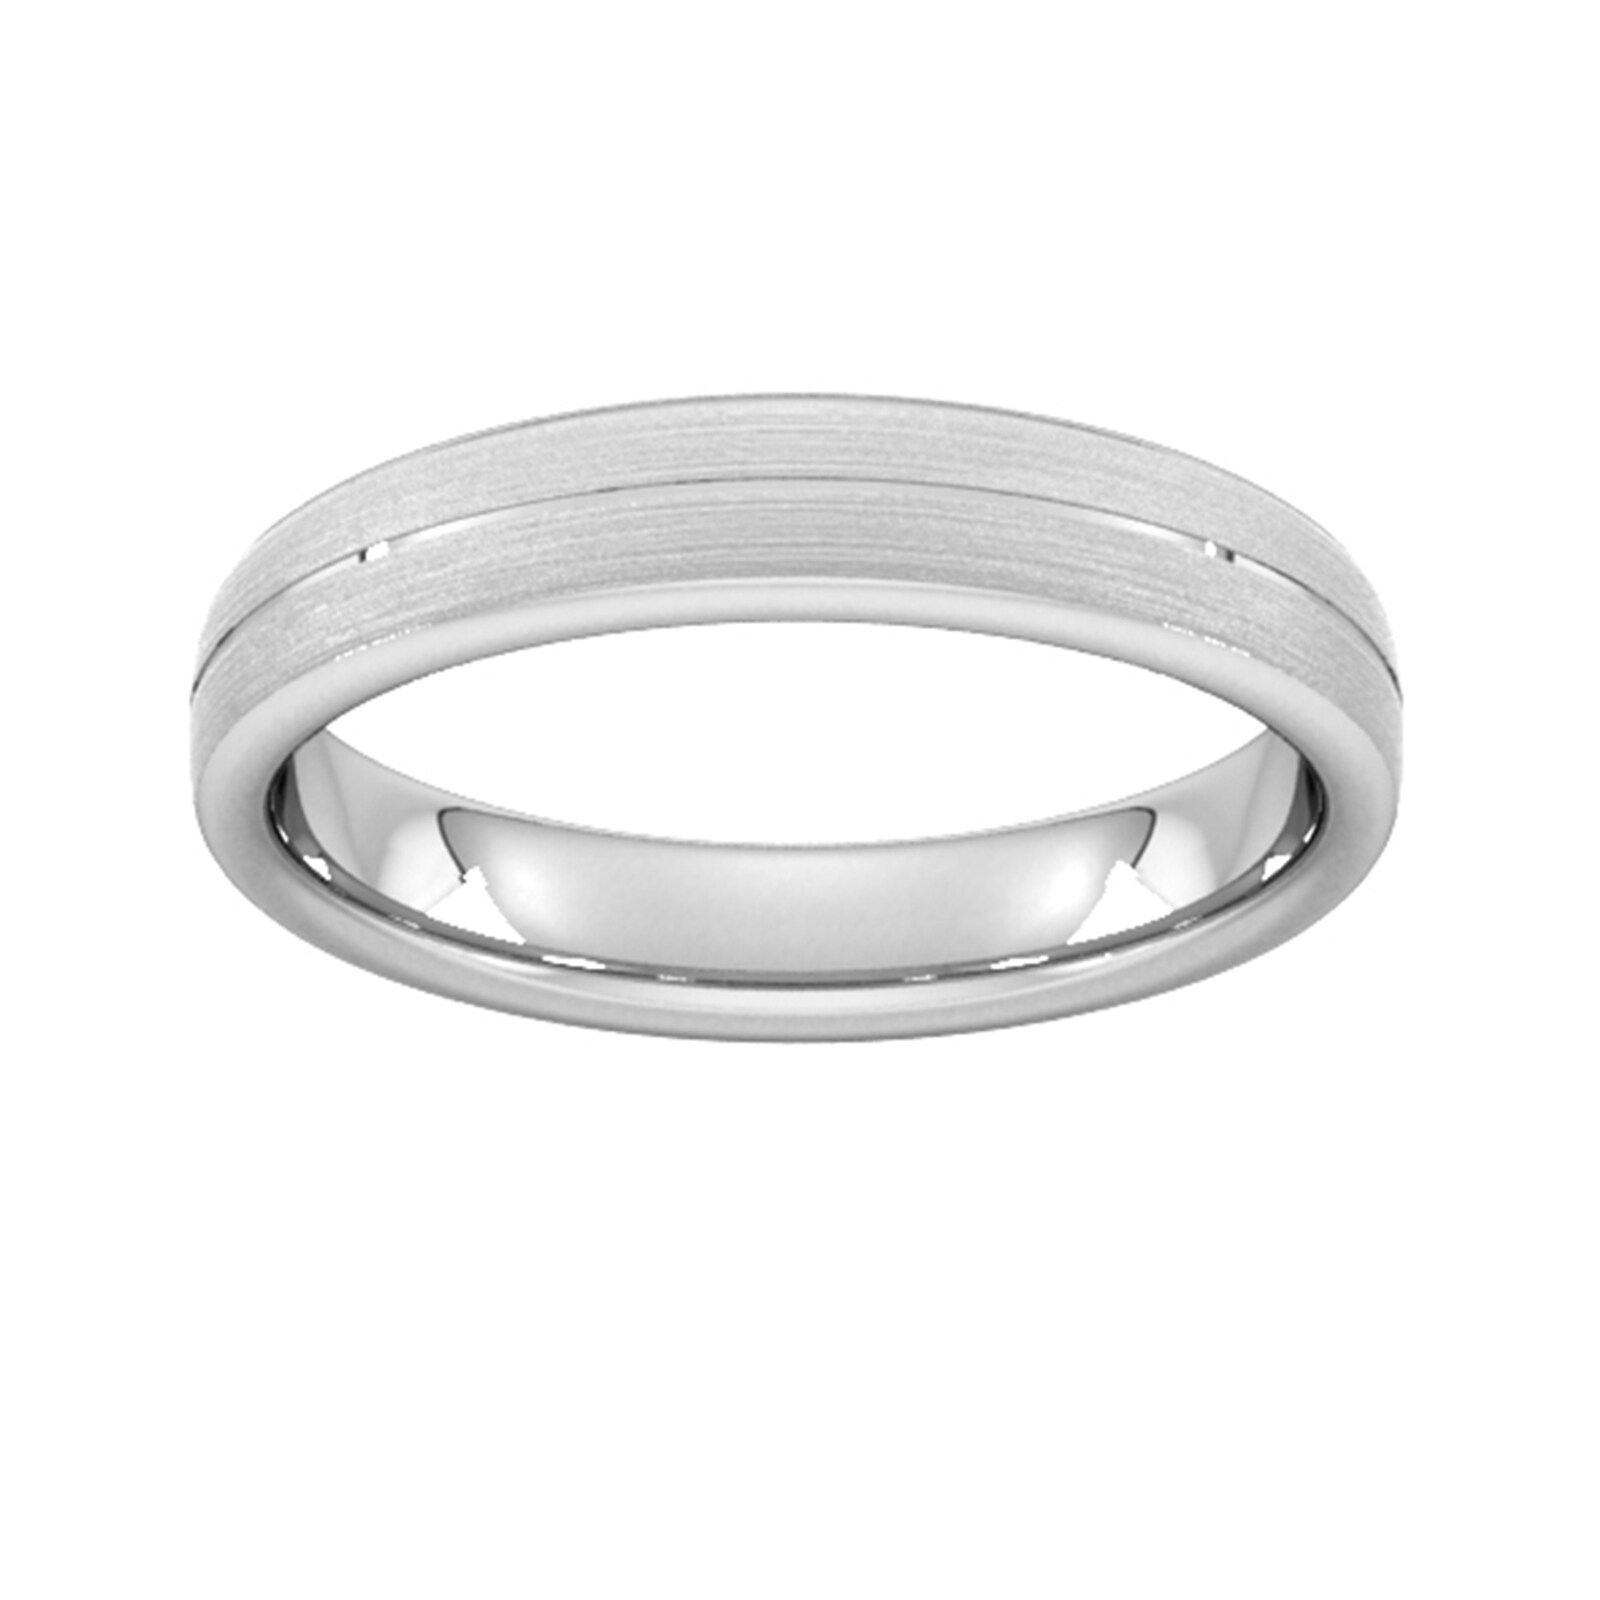 4mm Slight Court Heavy Centre Groove With Chamfered Edge Wedding Ring In 9 Carat White Gold - Ring Size O